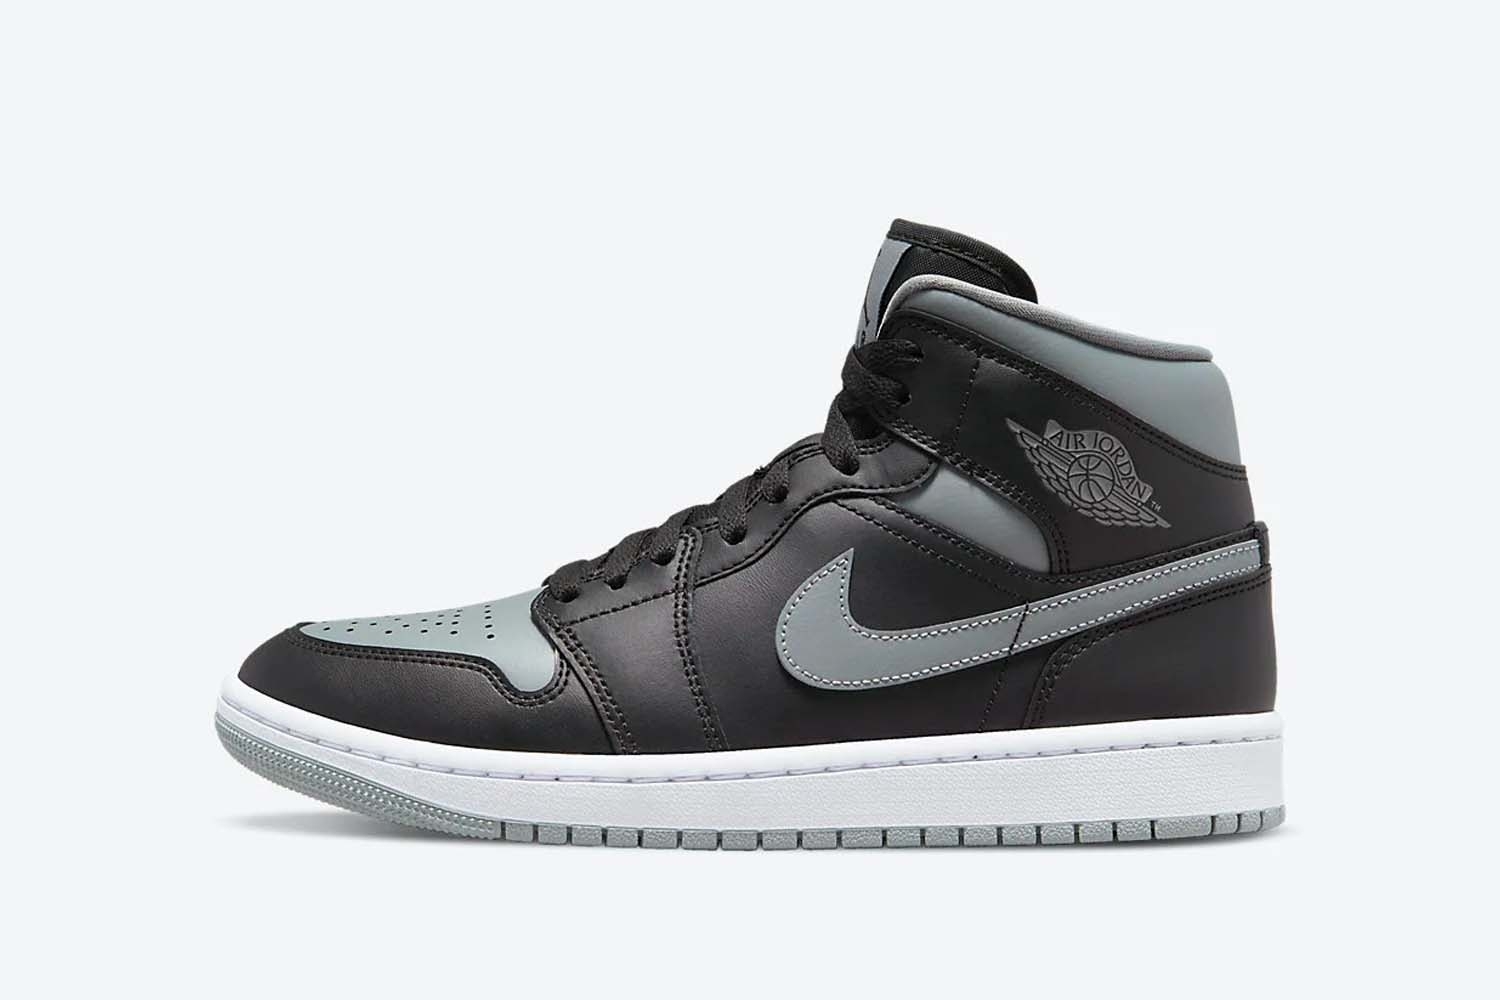 The Air Jordan 1 Mid gets a 'Shadow' colorway especially for women